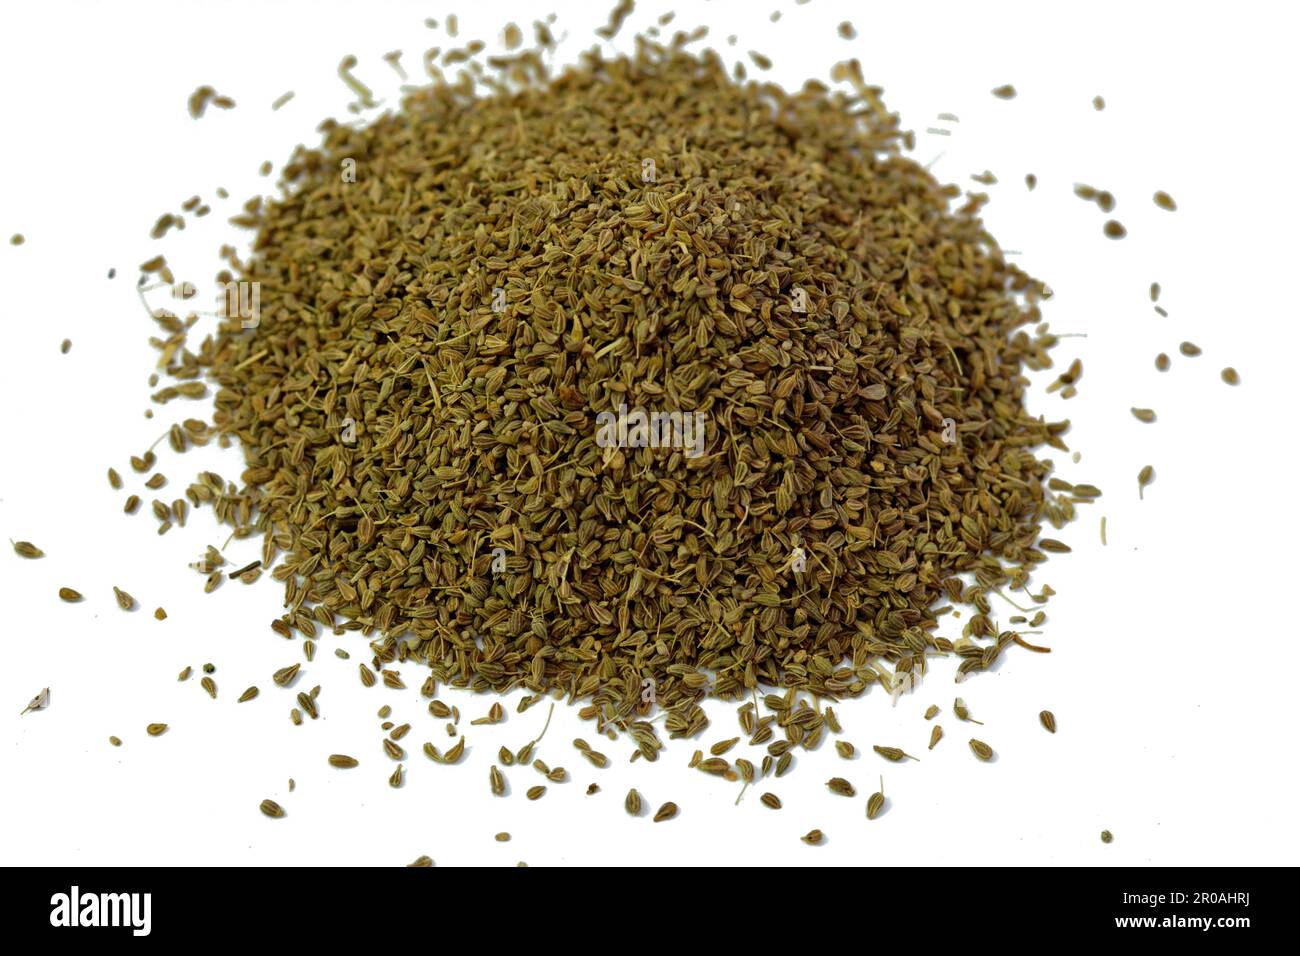 Anise, Pimpinella anisum also called aniseed or anix, a flowering plant in the family Apiaceae, widely cultivated and used to flavor food, candy, and Stock Photo